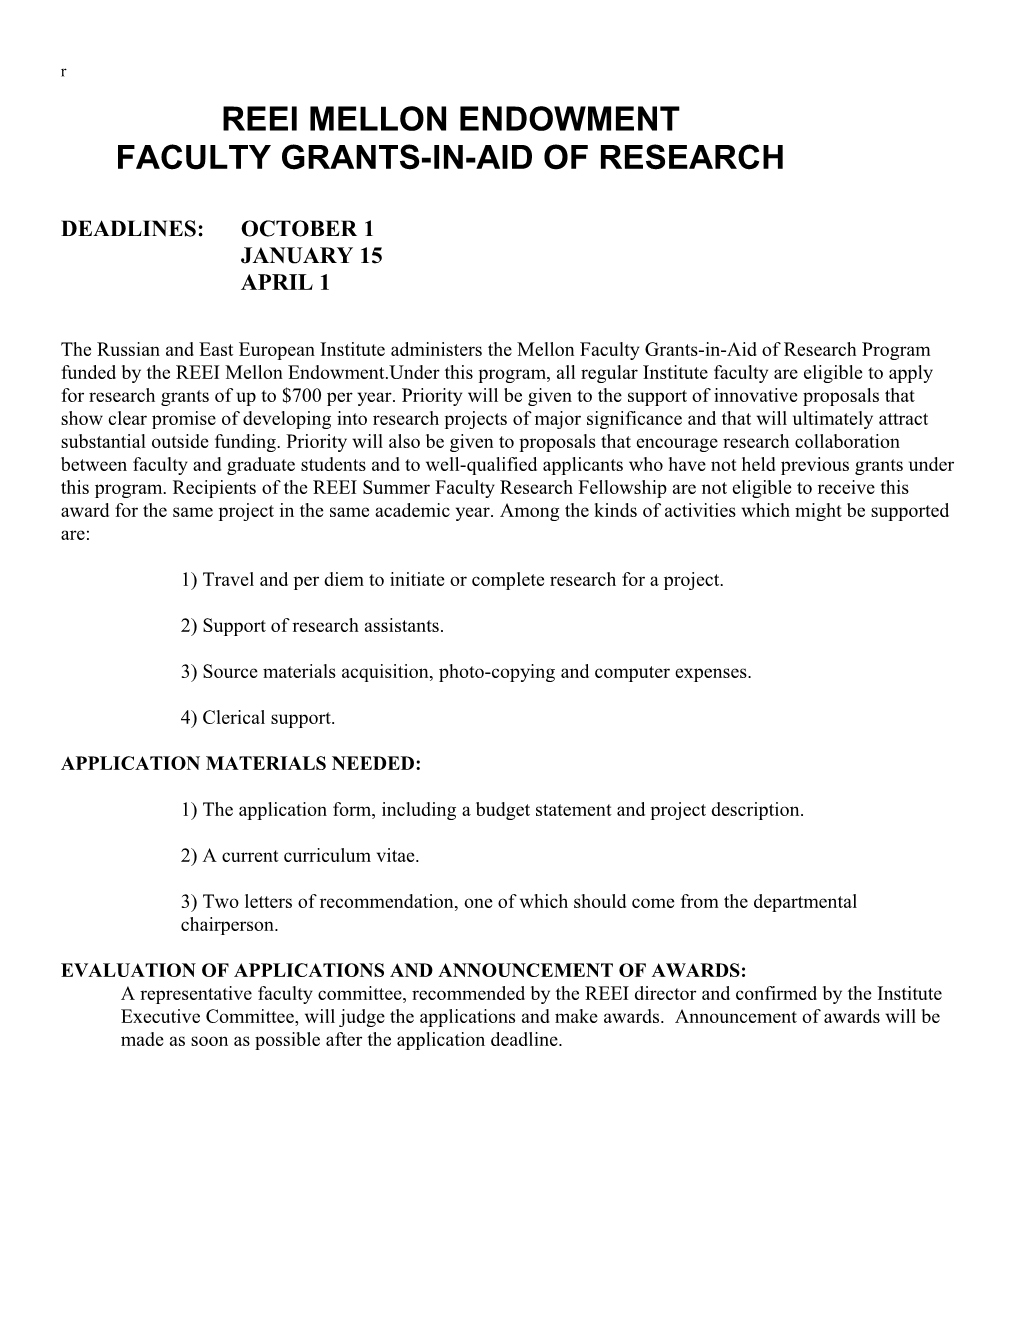 Faculty Grants-In-Aid of Research